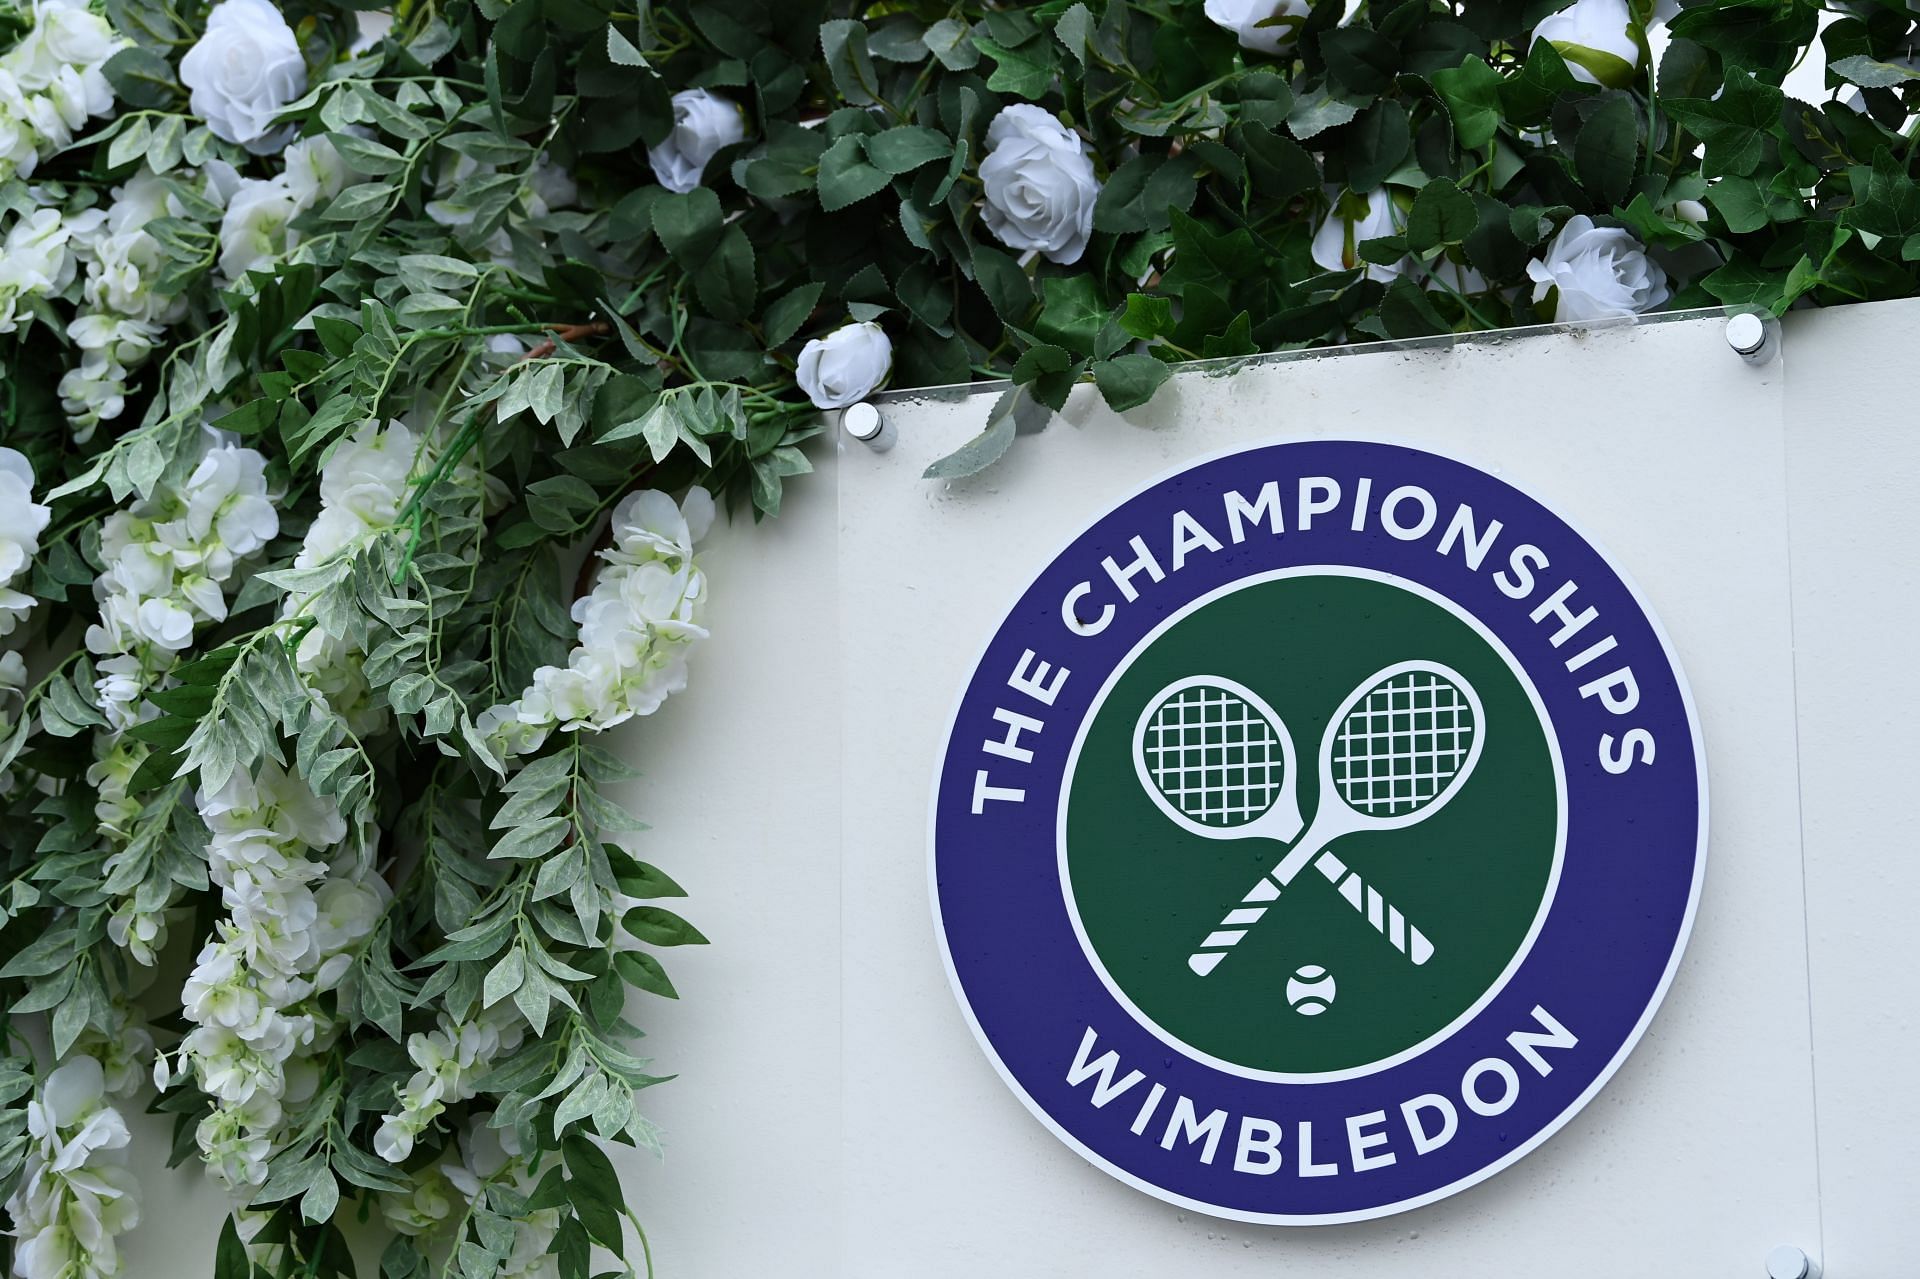 The 2022 Wimbledon has been mired in controversies for a while now.